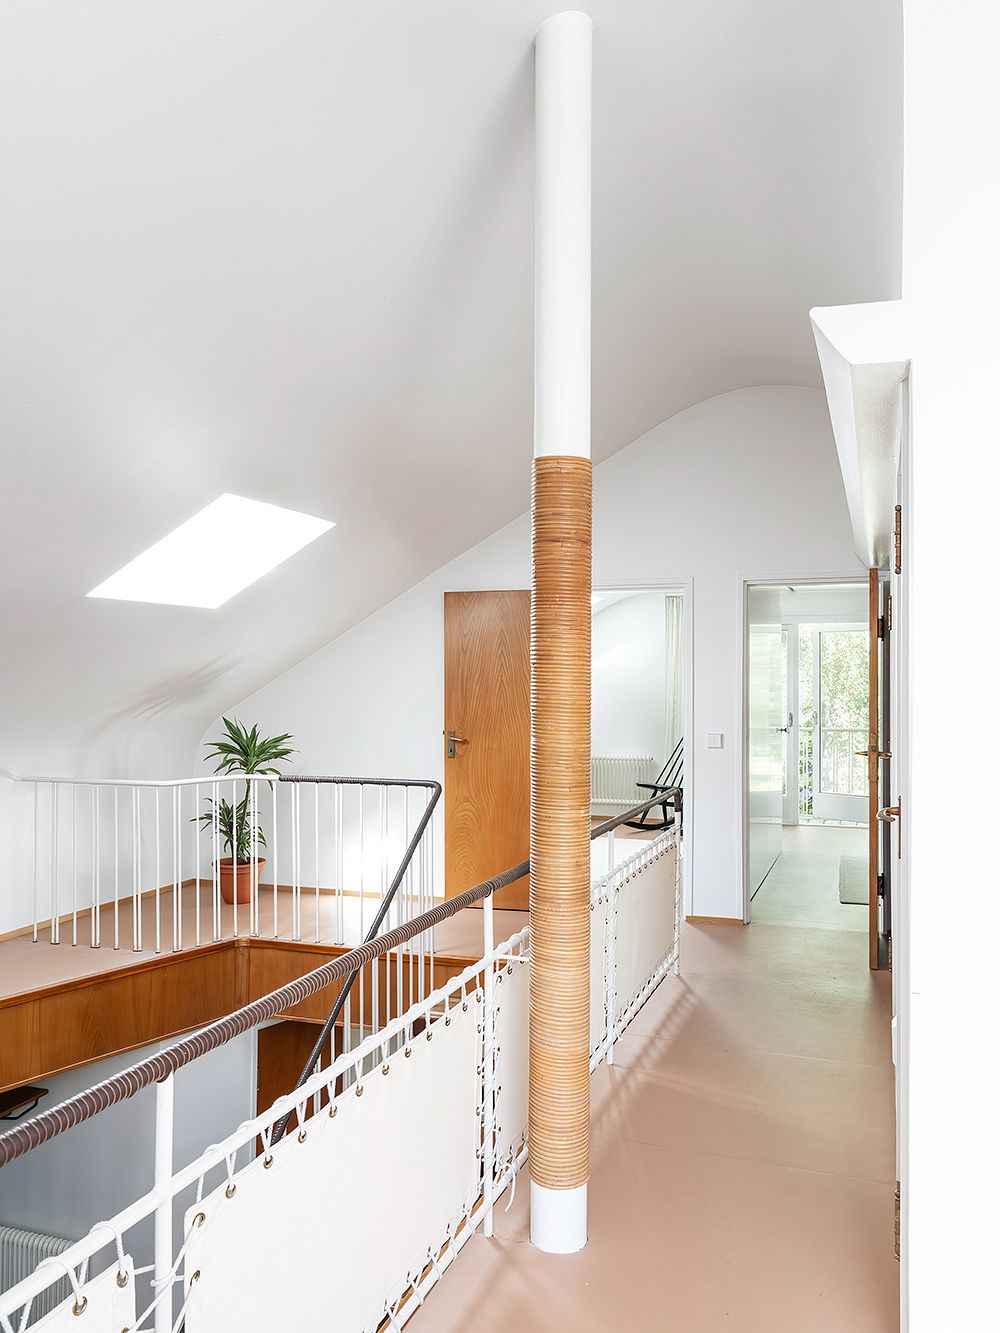 An image featuring Villa Ervi designed by architect Aarne Ervi. The photo shows the interior of the upstairs lobby.